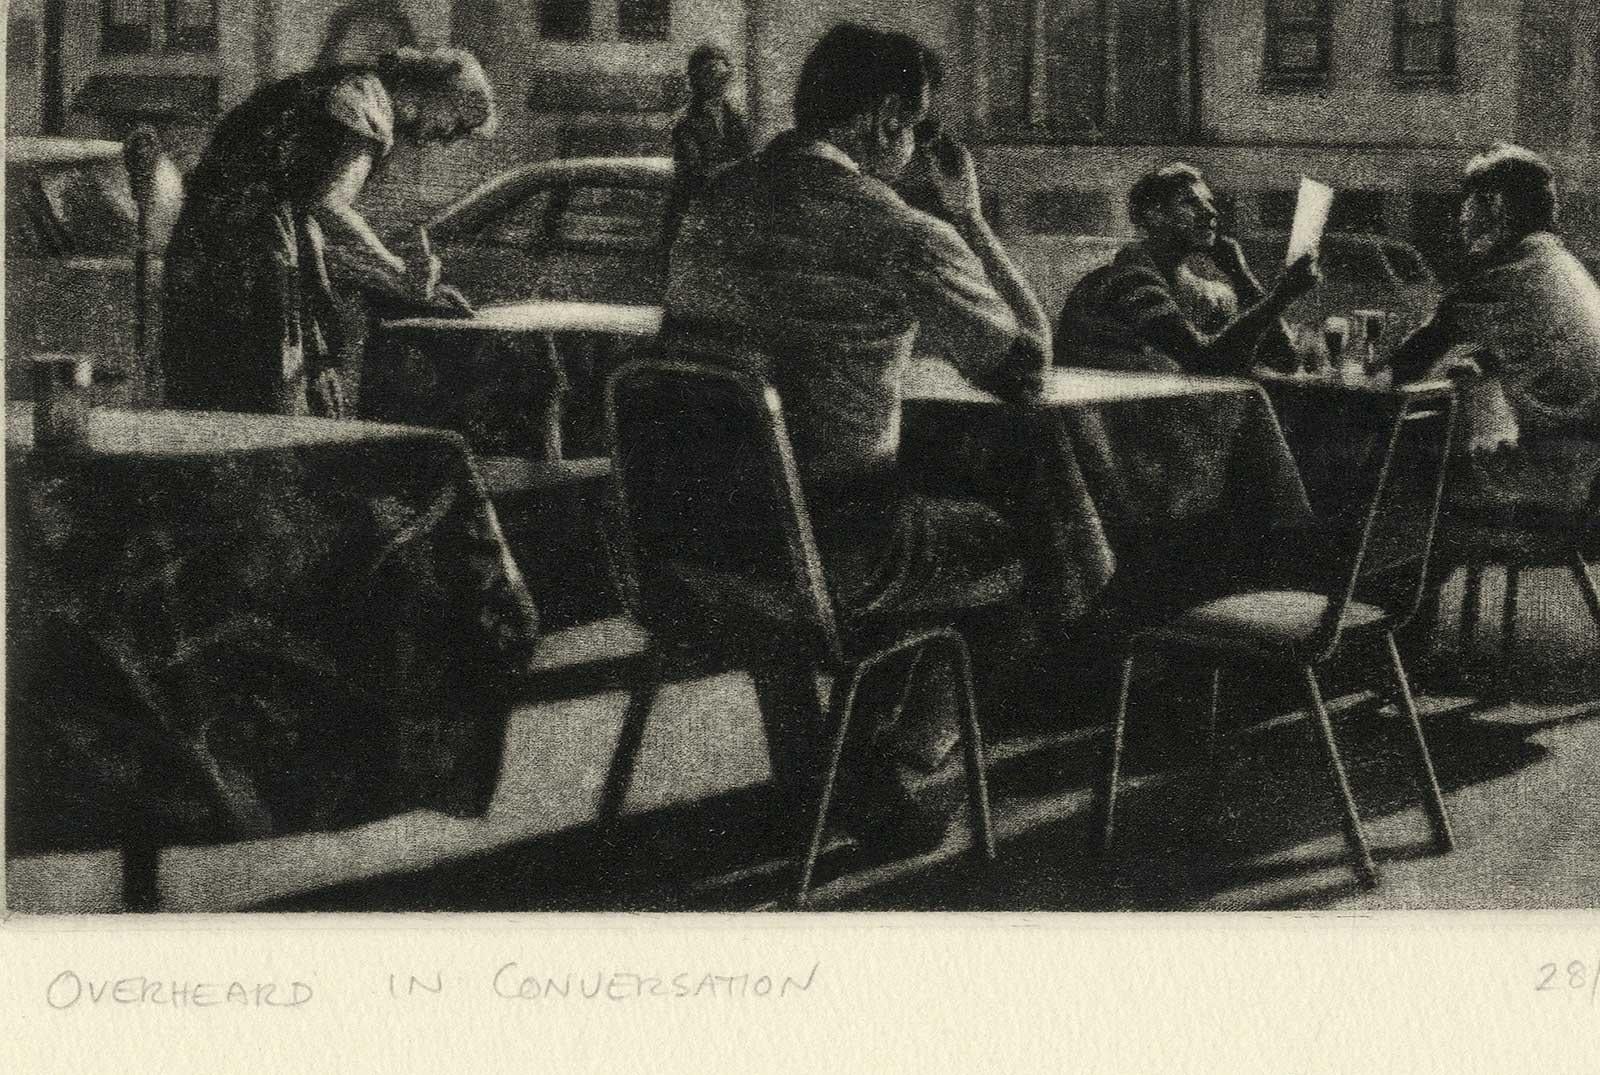 Overheard in Conversation (a crowded restaurant where loose lips slip) - Print by Art Werger